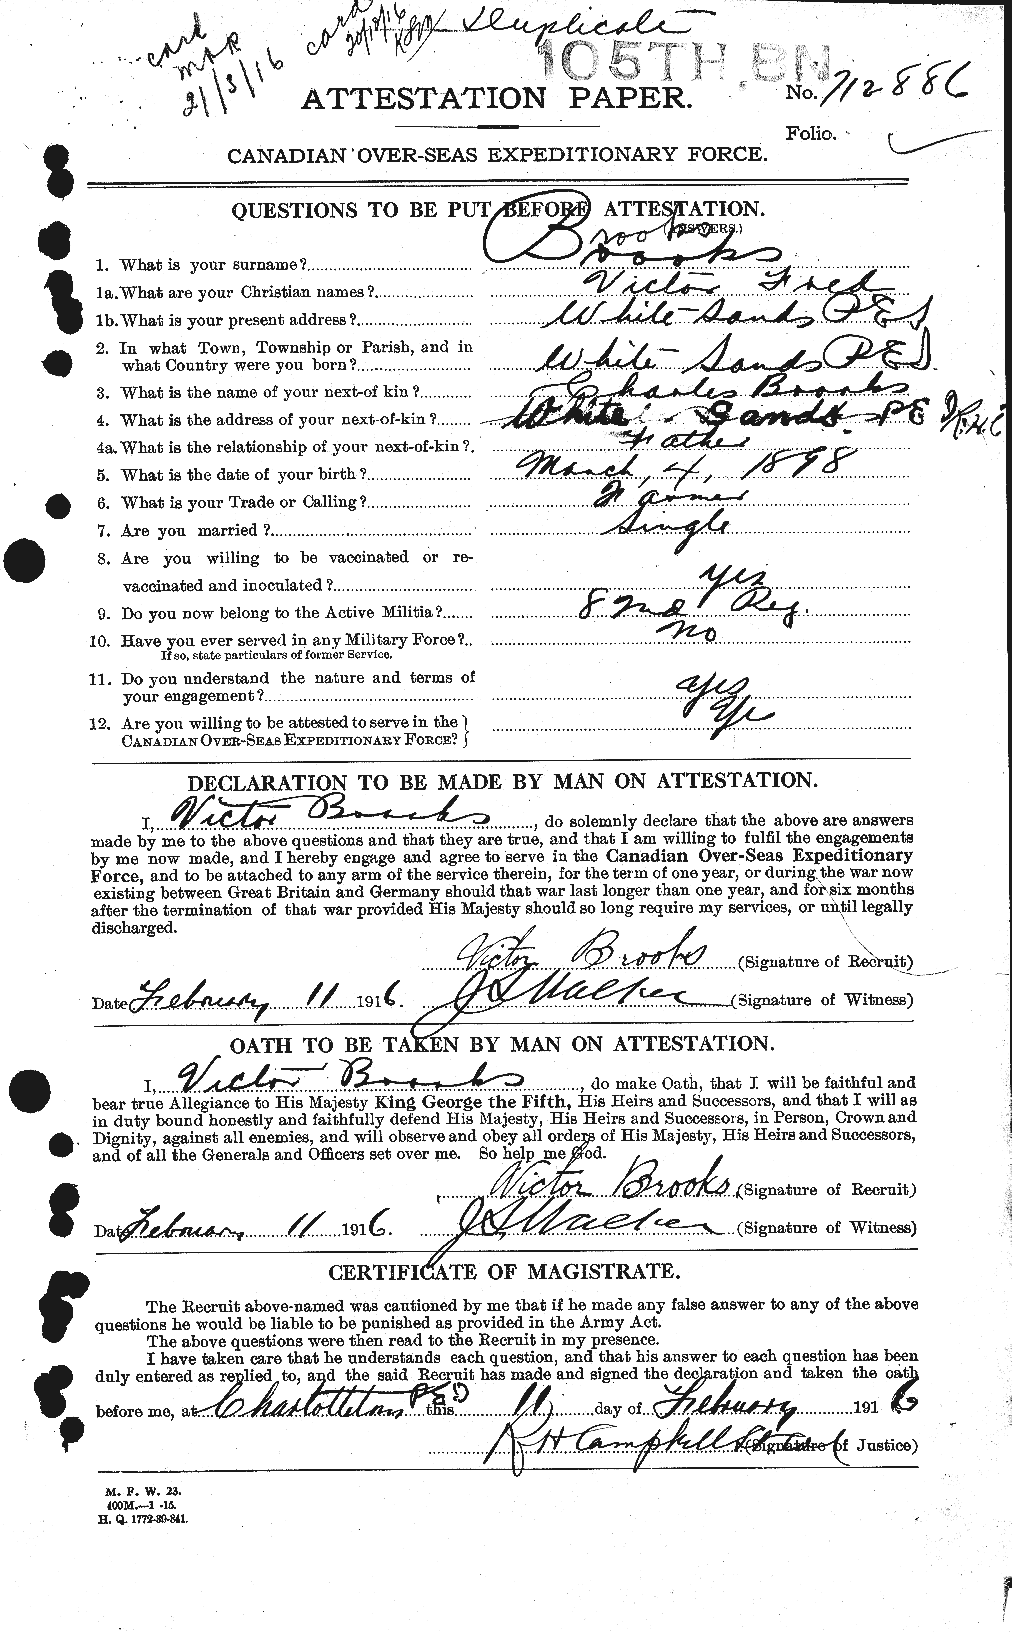 Personnel Records of the First World War - CEF 264714a